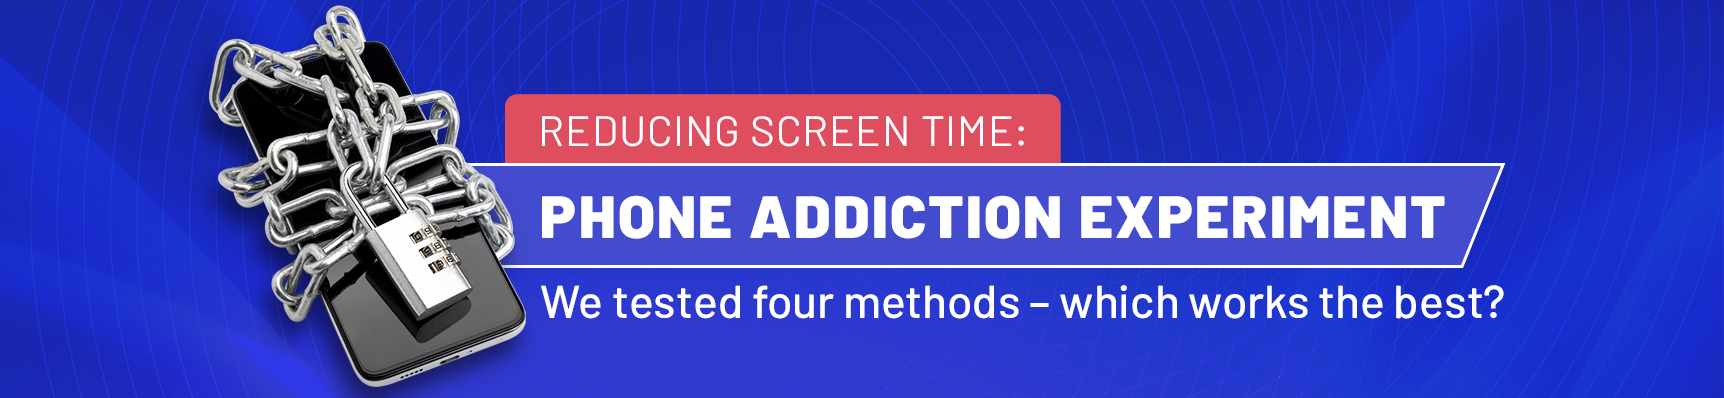 Reducing Screen Time: Phone Addiction Experiment